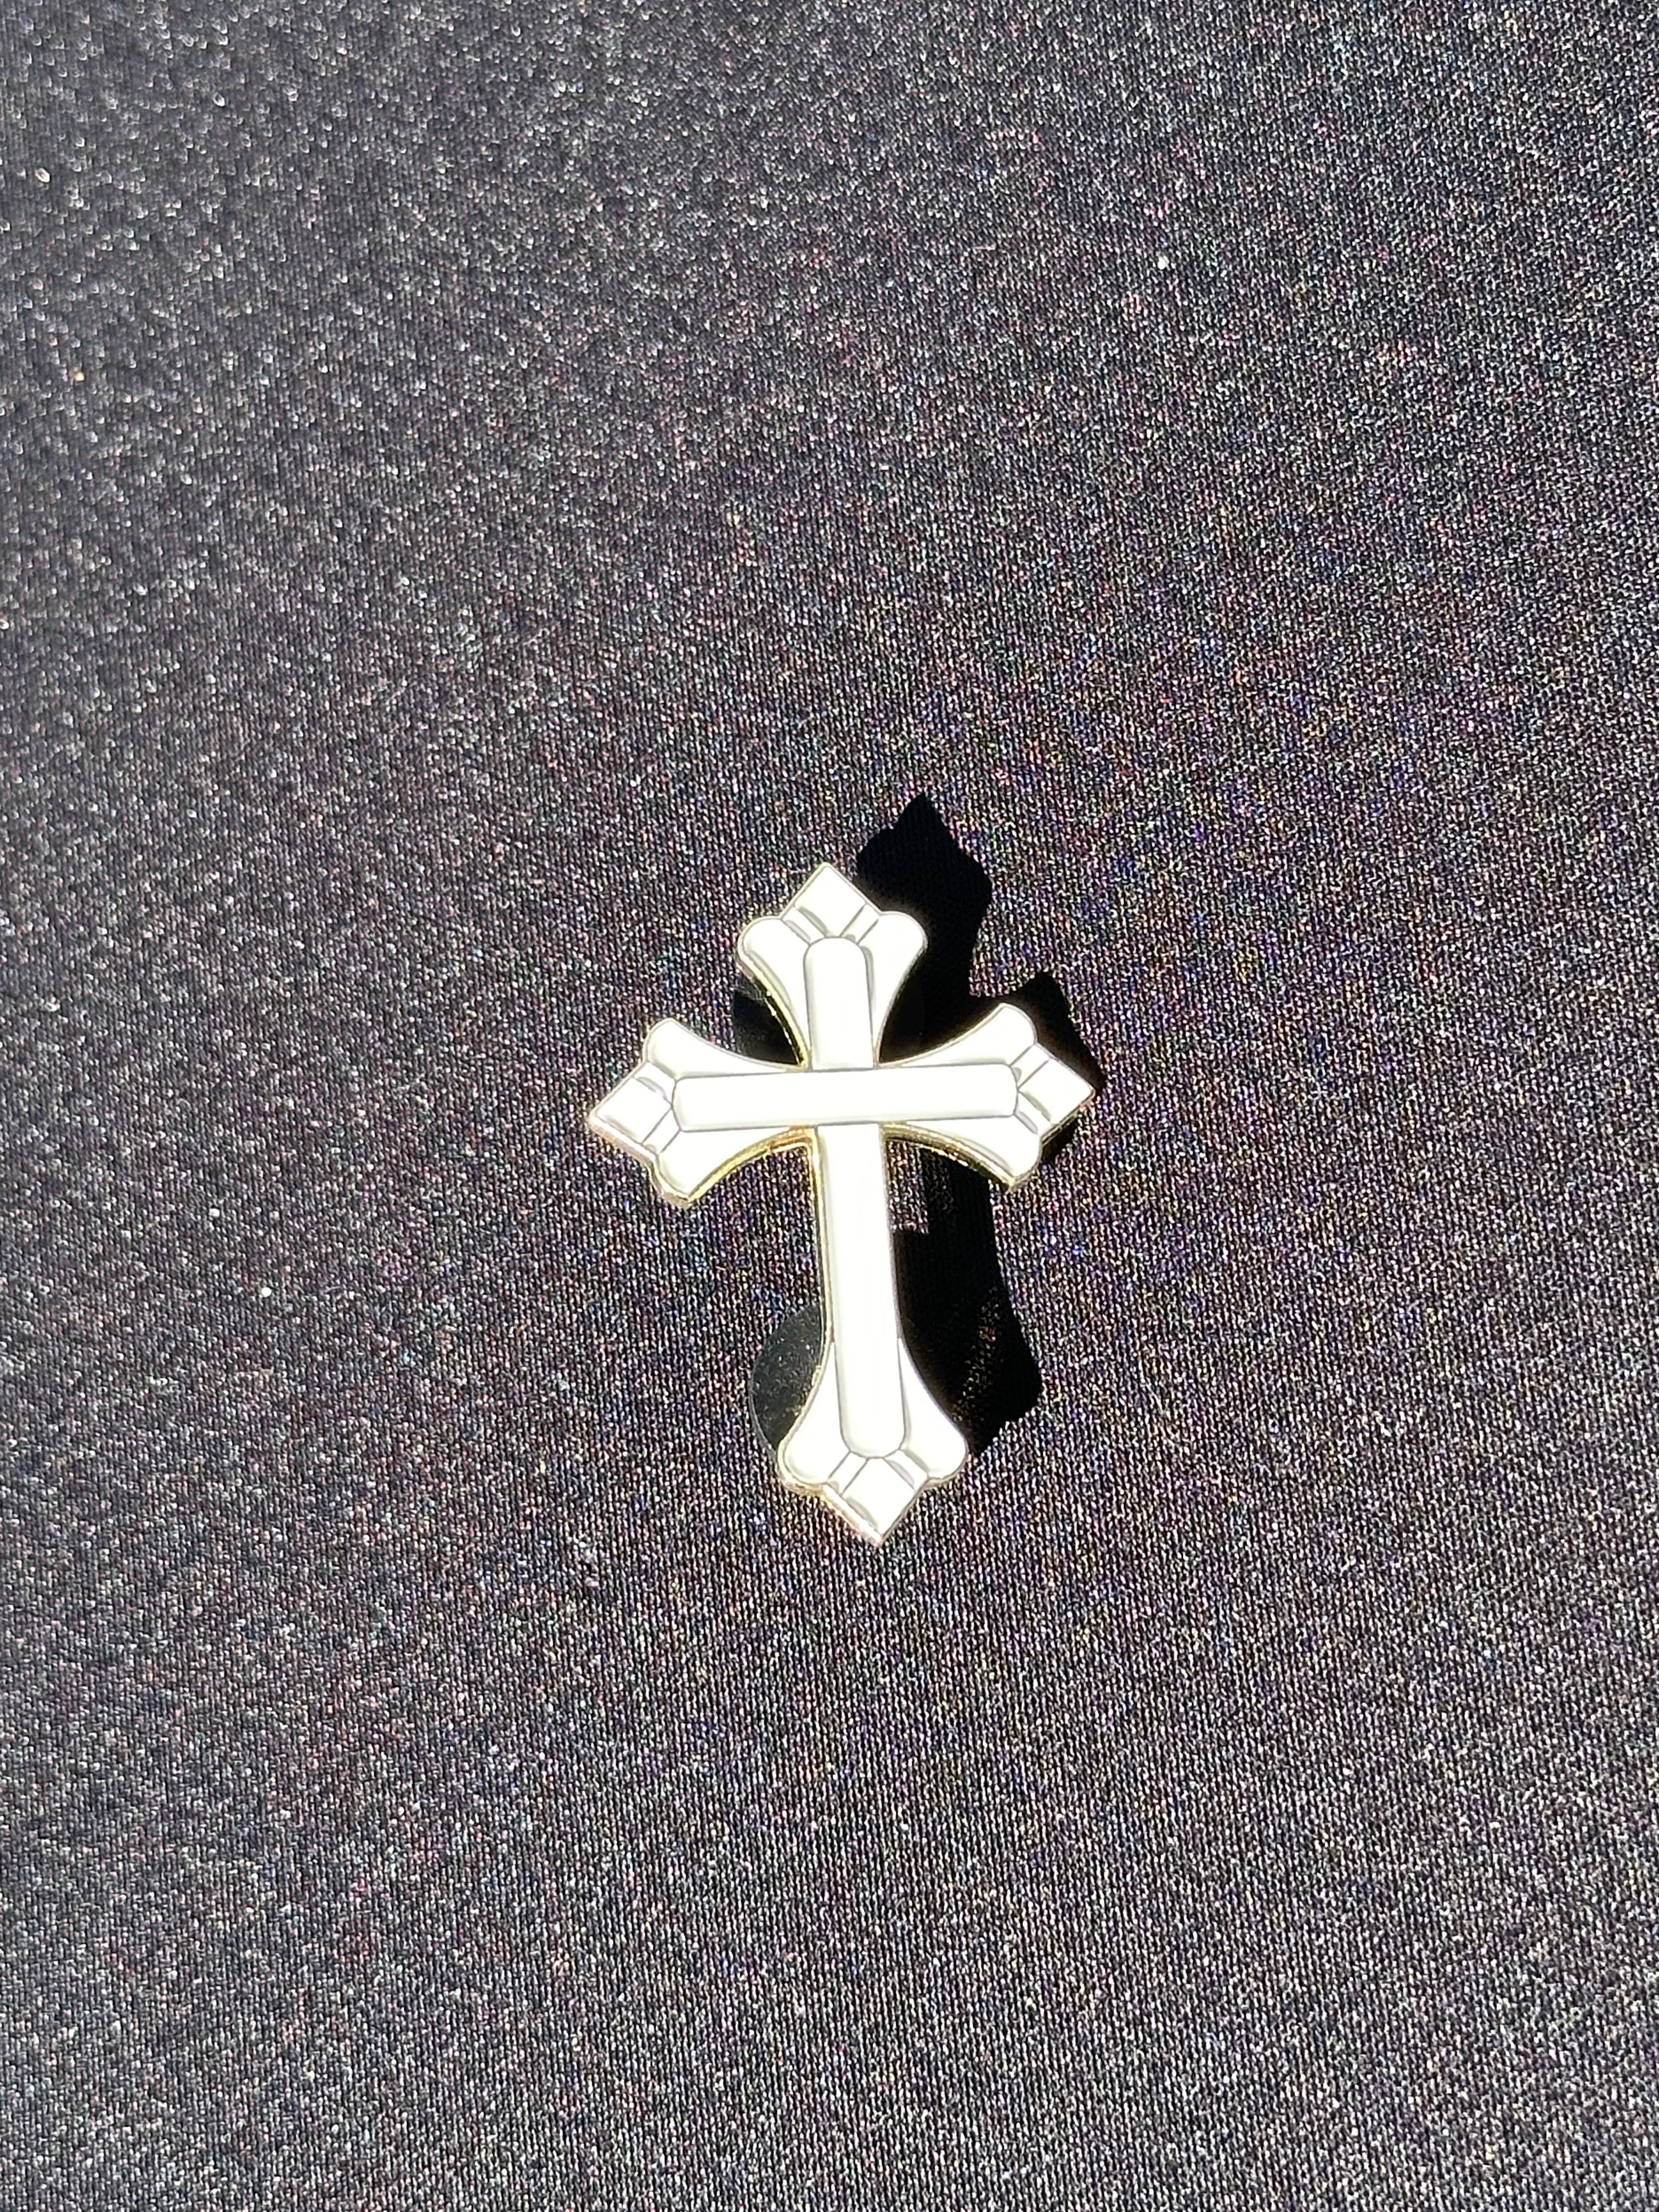 *NEW PEARL WHITE "CRUCIFIX" EXCLUSIVE PIN VERY LIMITED